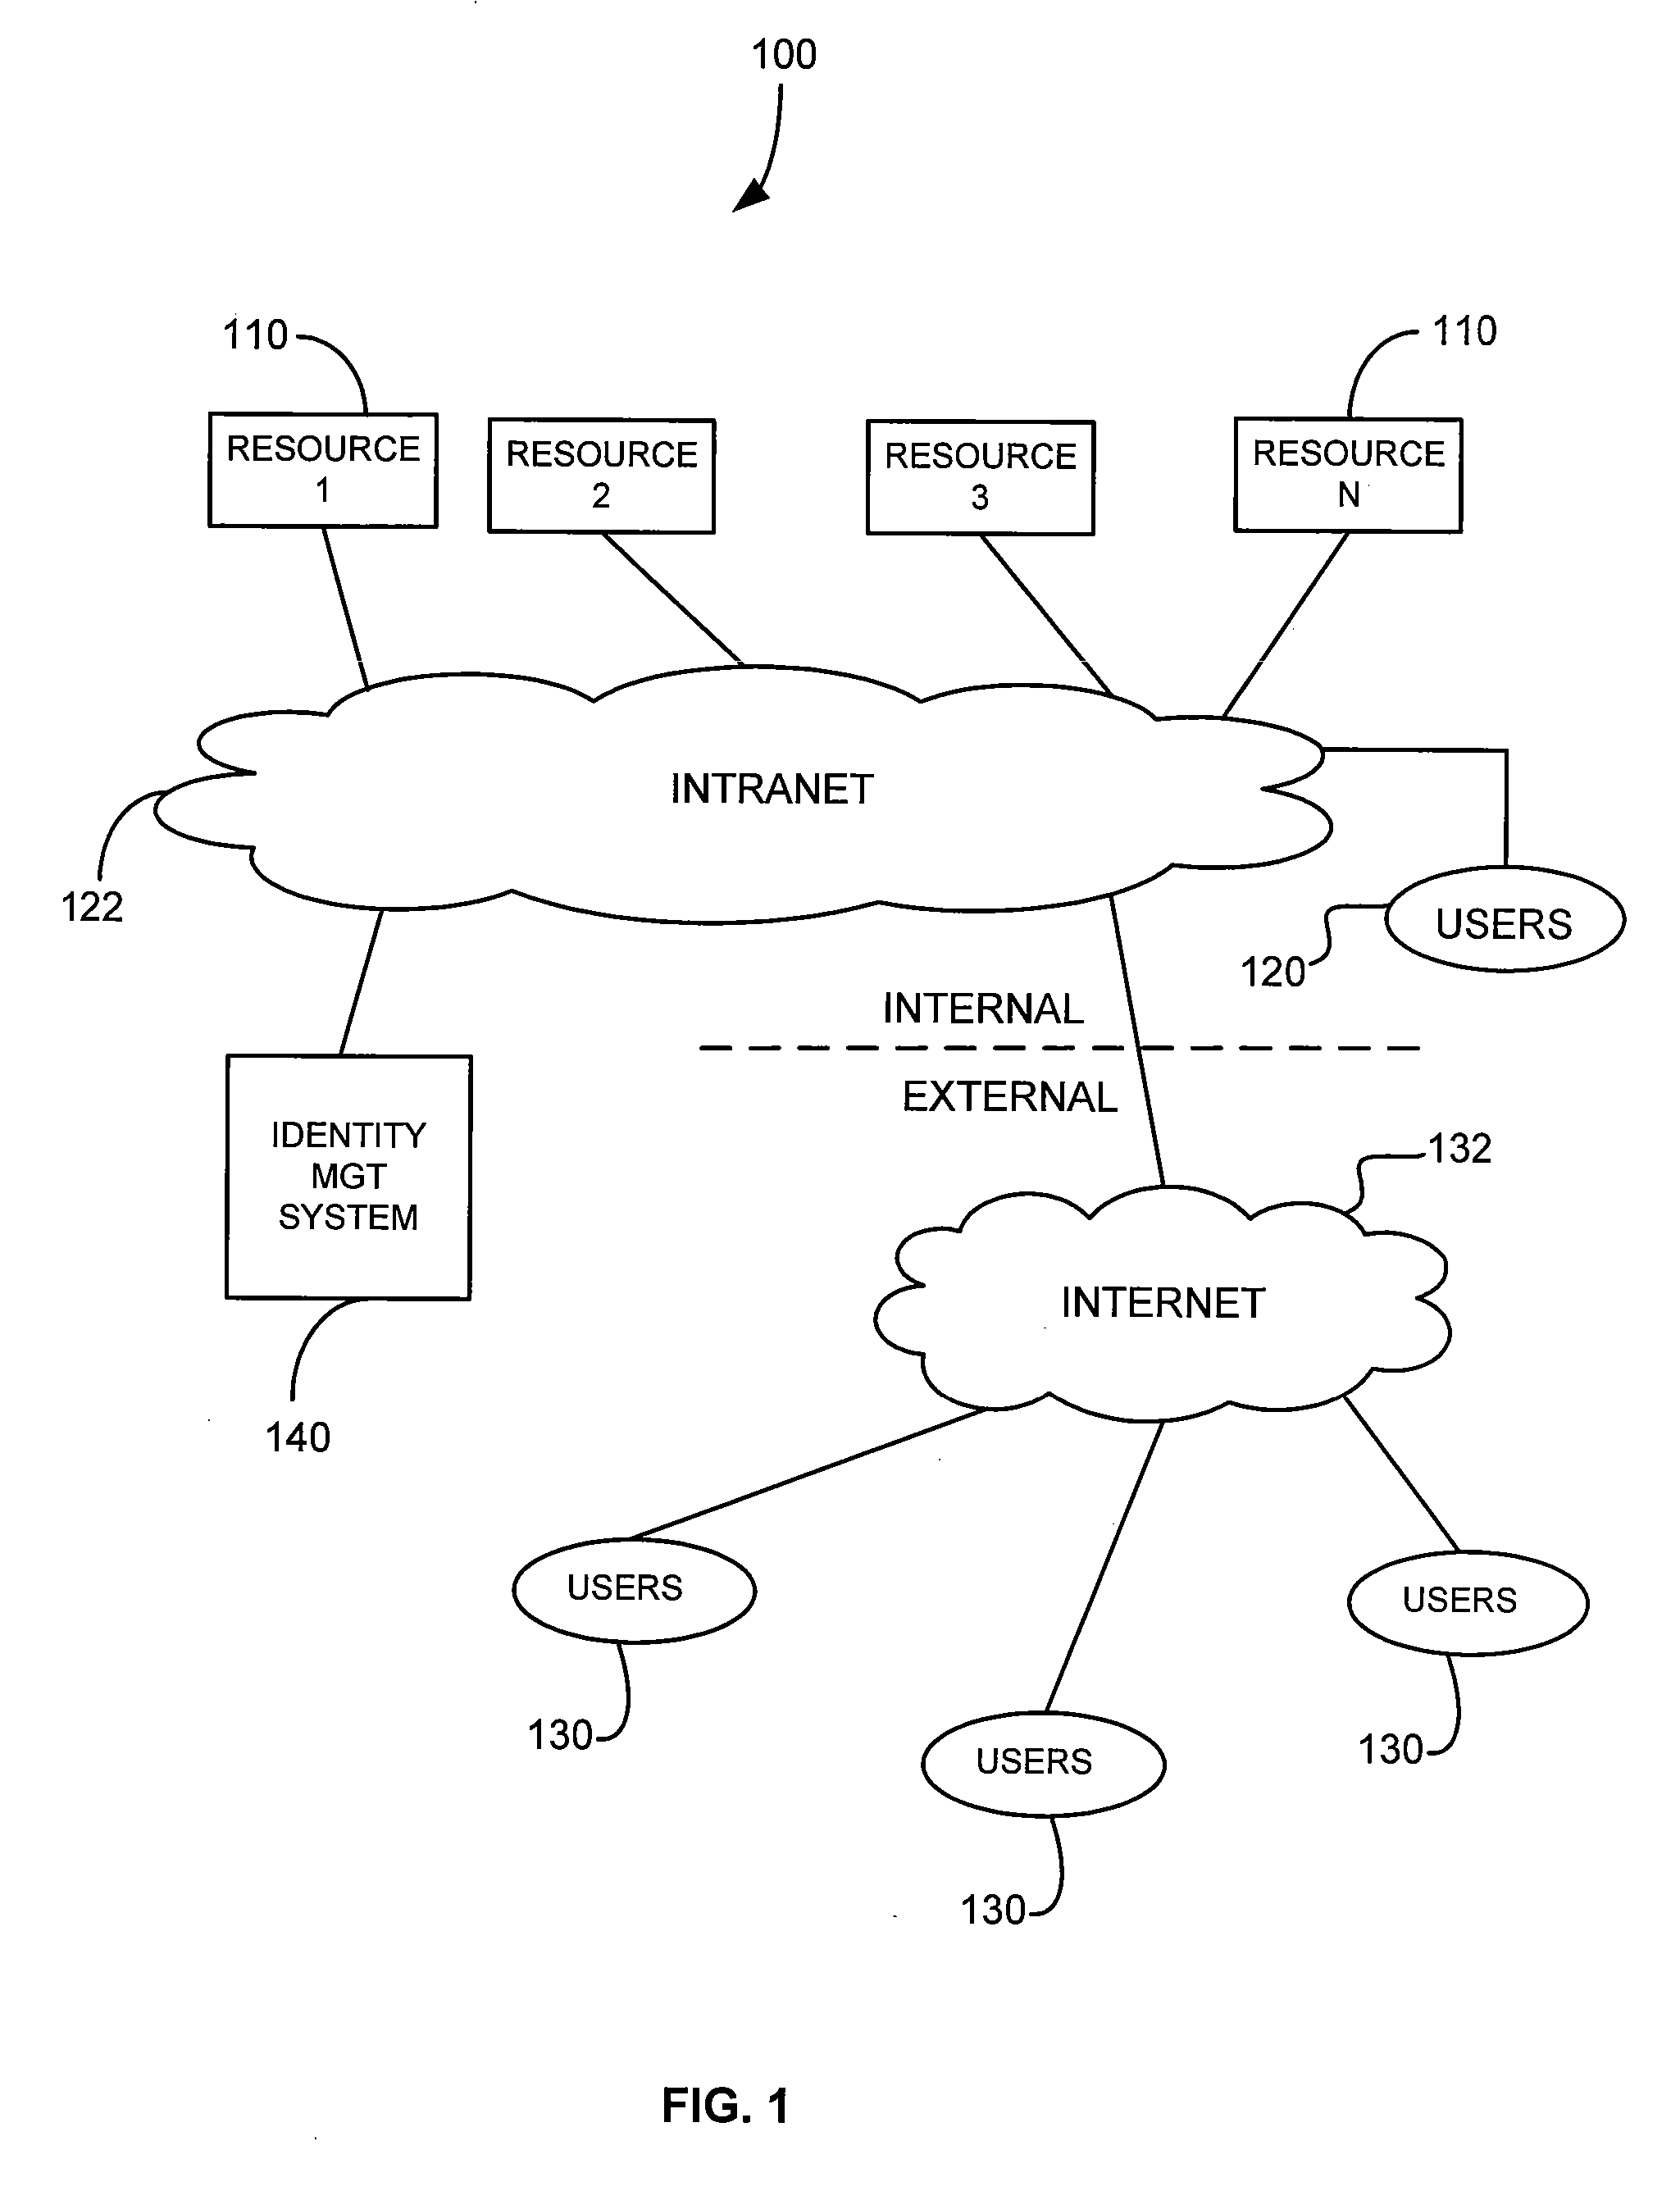 Identity management system for managing access to resources